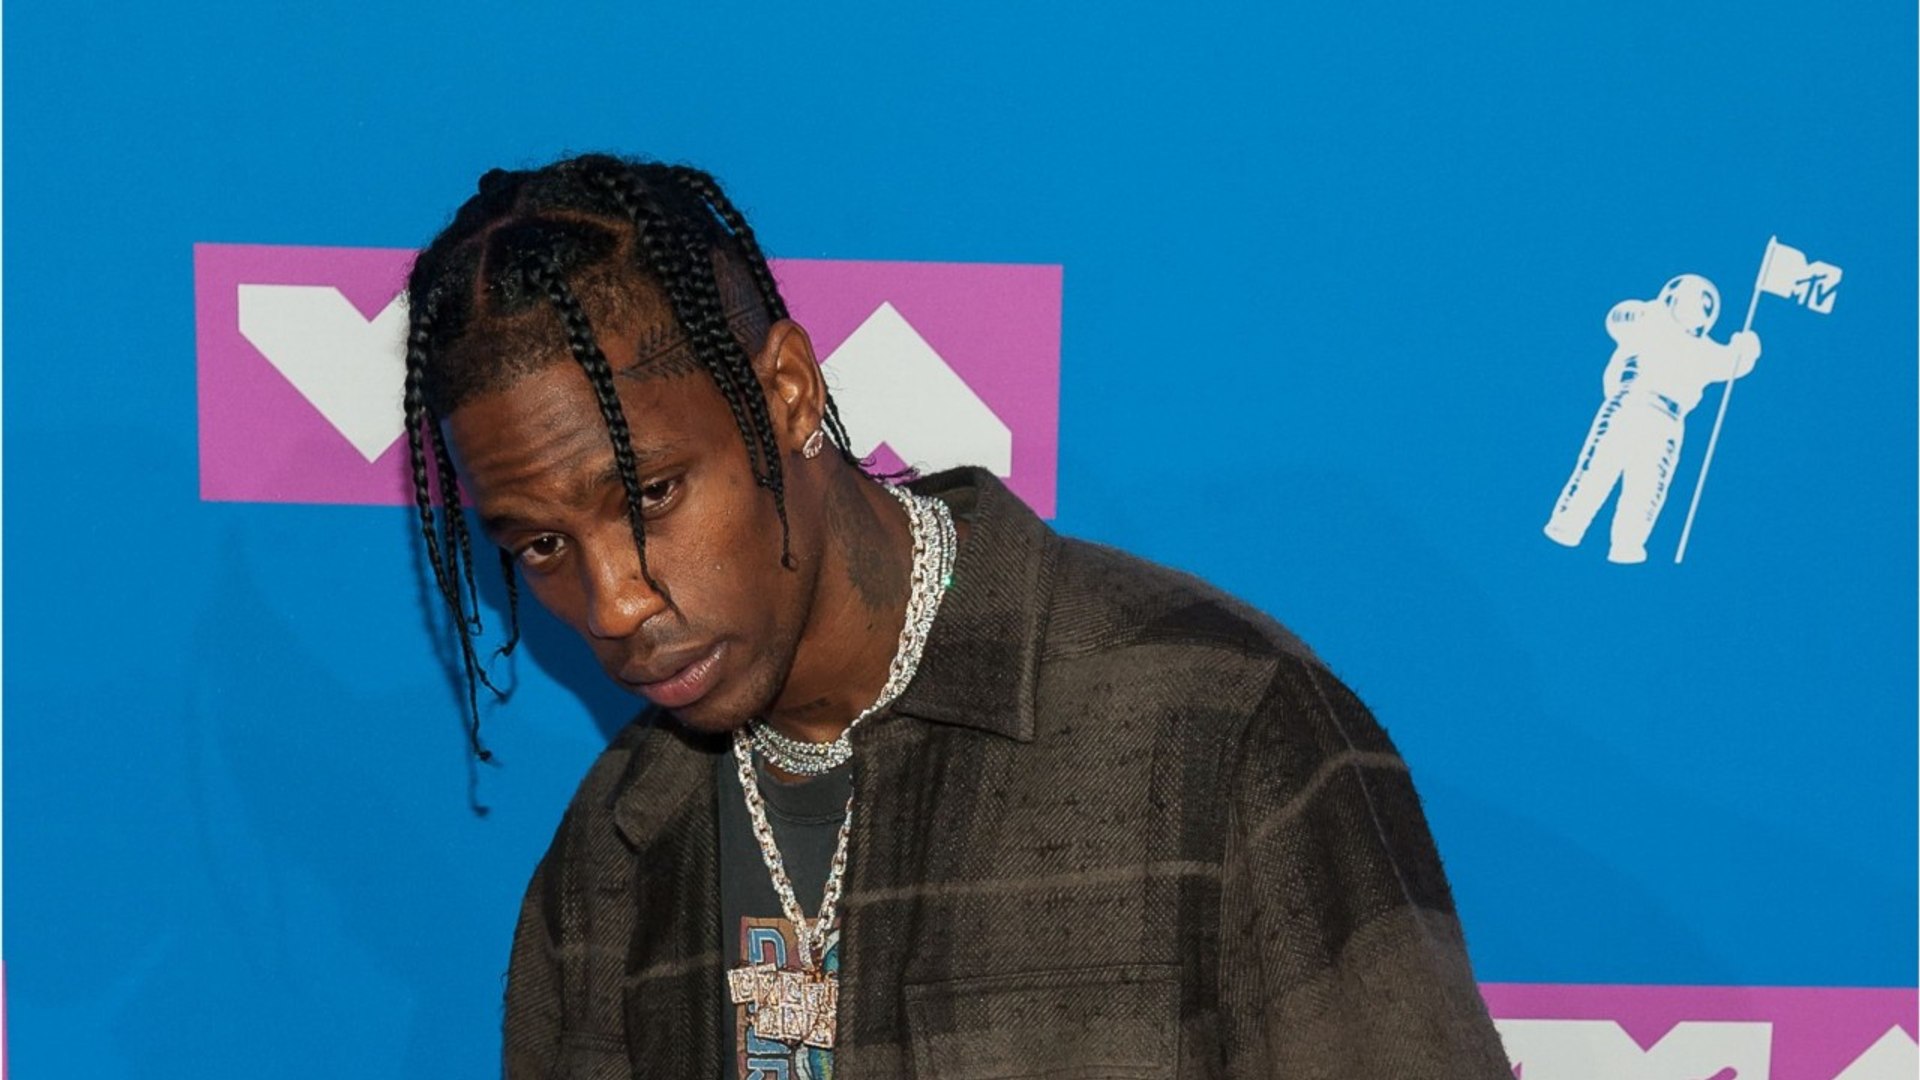 Travis Scott Joined By James Blake At VMA's